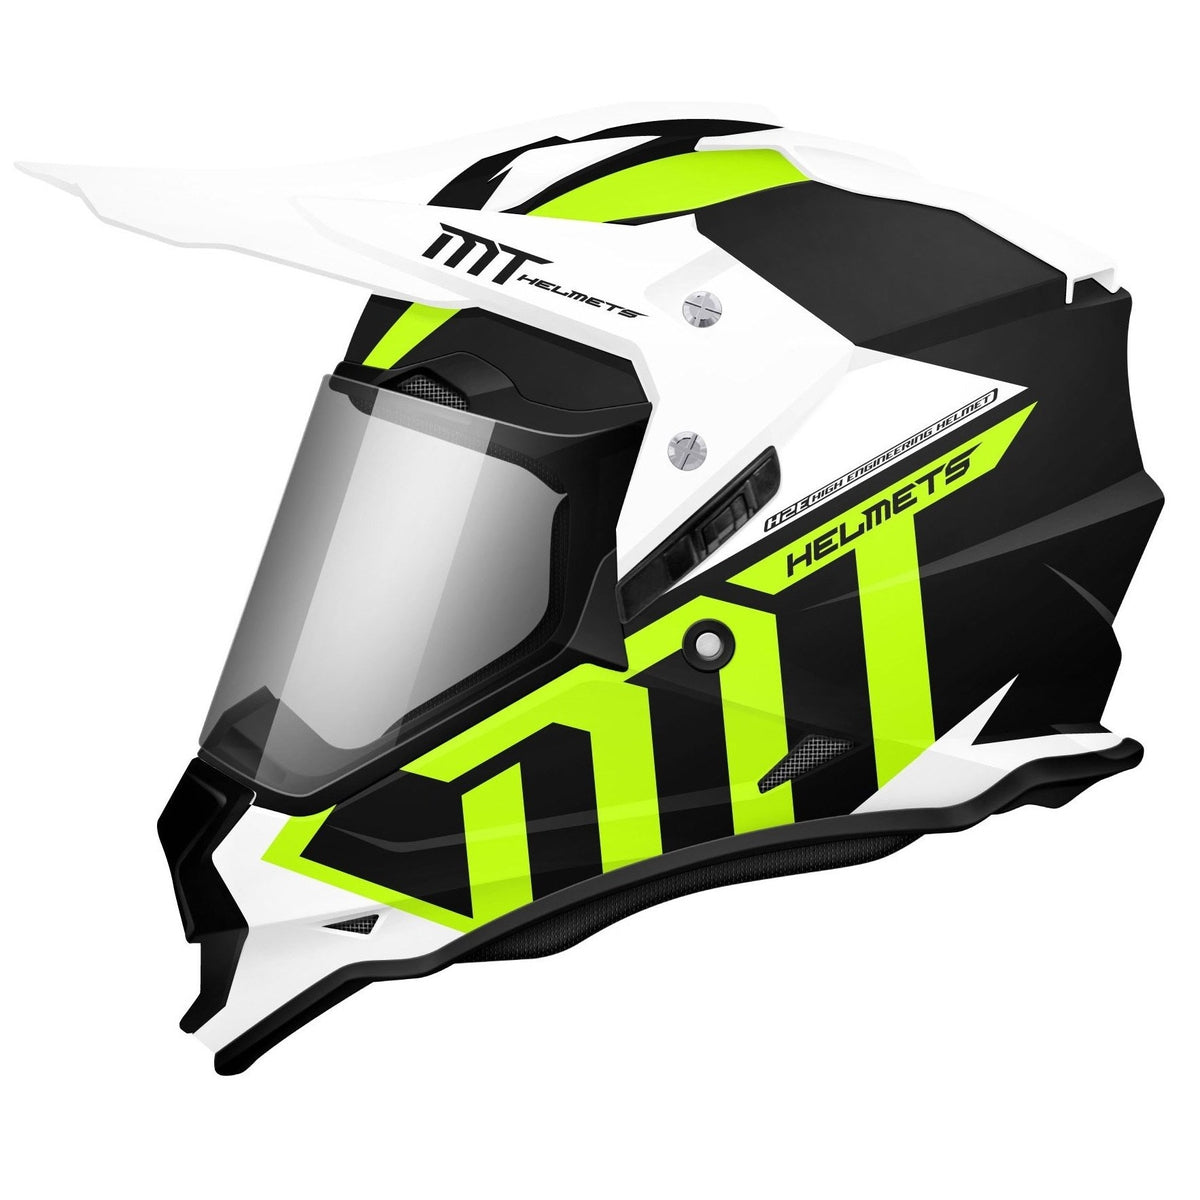 MT Mode DS Helmet With Electric Shield - PeakBoys